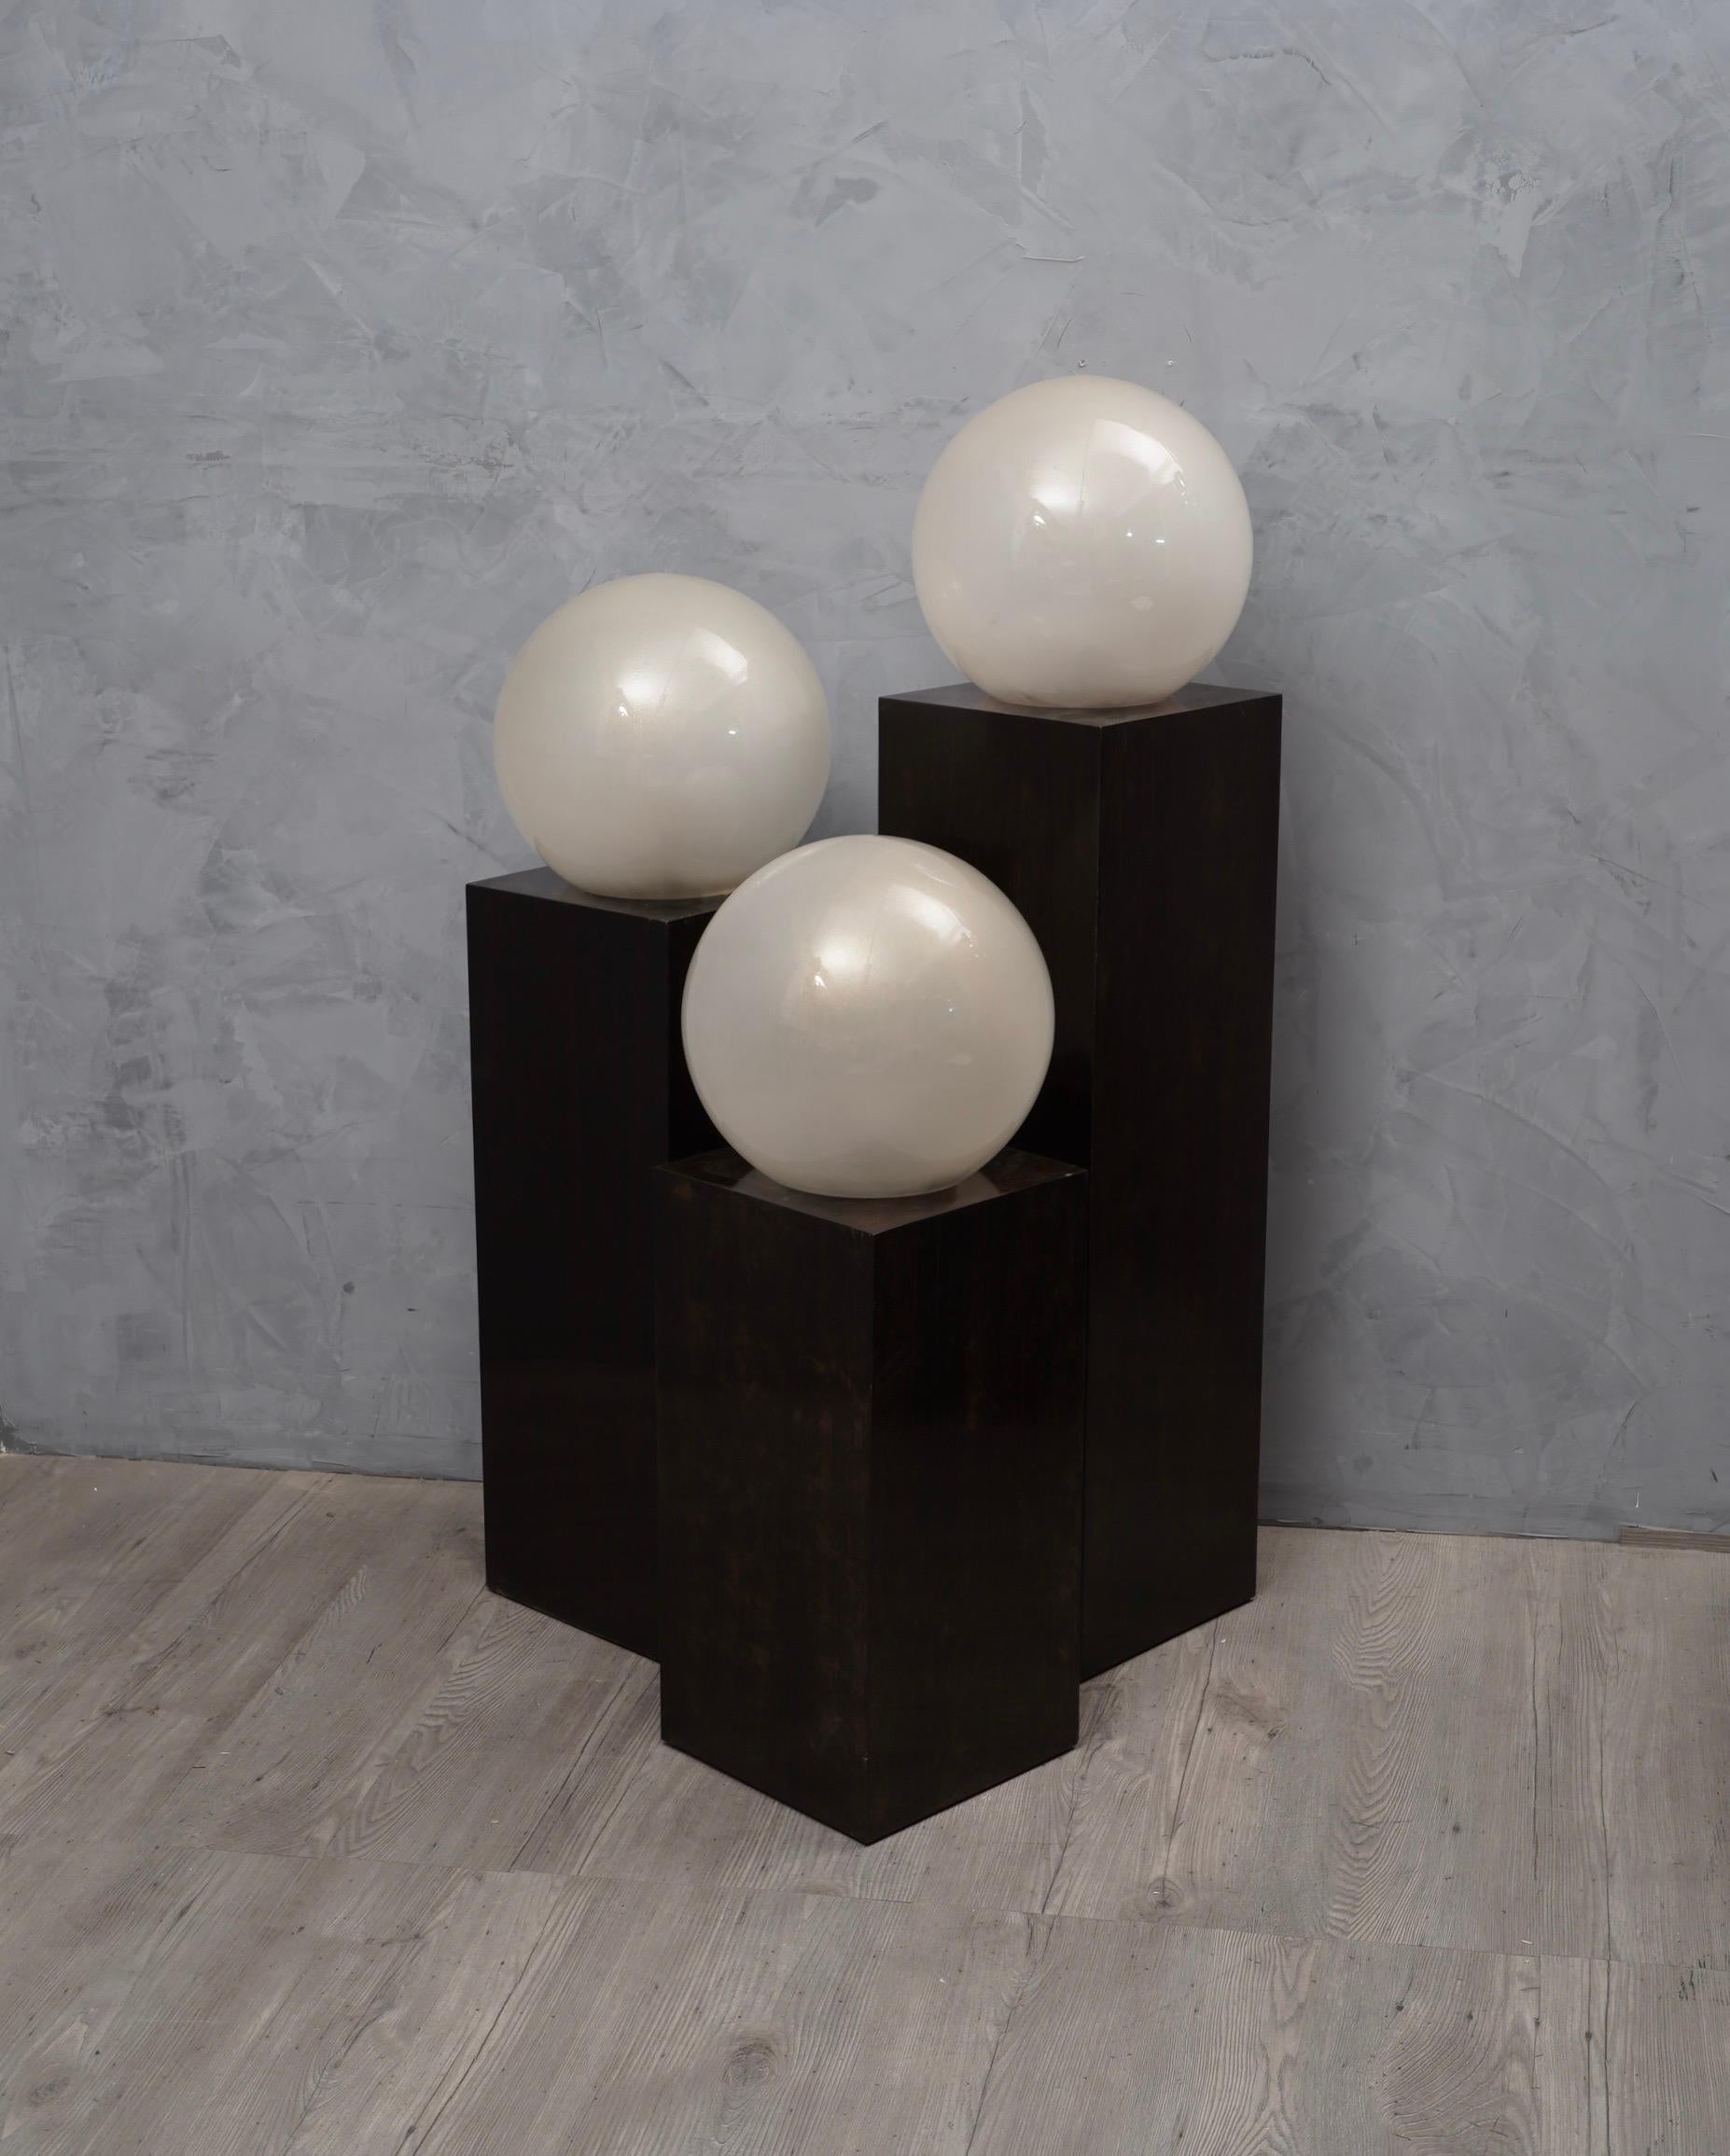 Stunning and unique triptych of floor lamps, with a linear but super-elegant design also due to the use of very precious materials such as Murano glass and ebony / macassar wood.

The table lamps are composed by a series of three large glass spheres